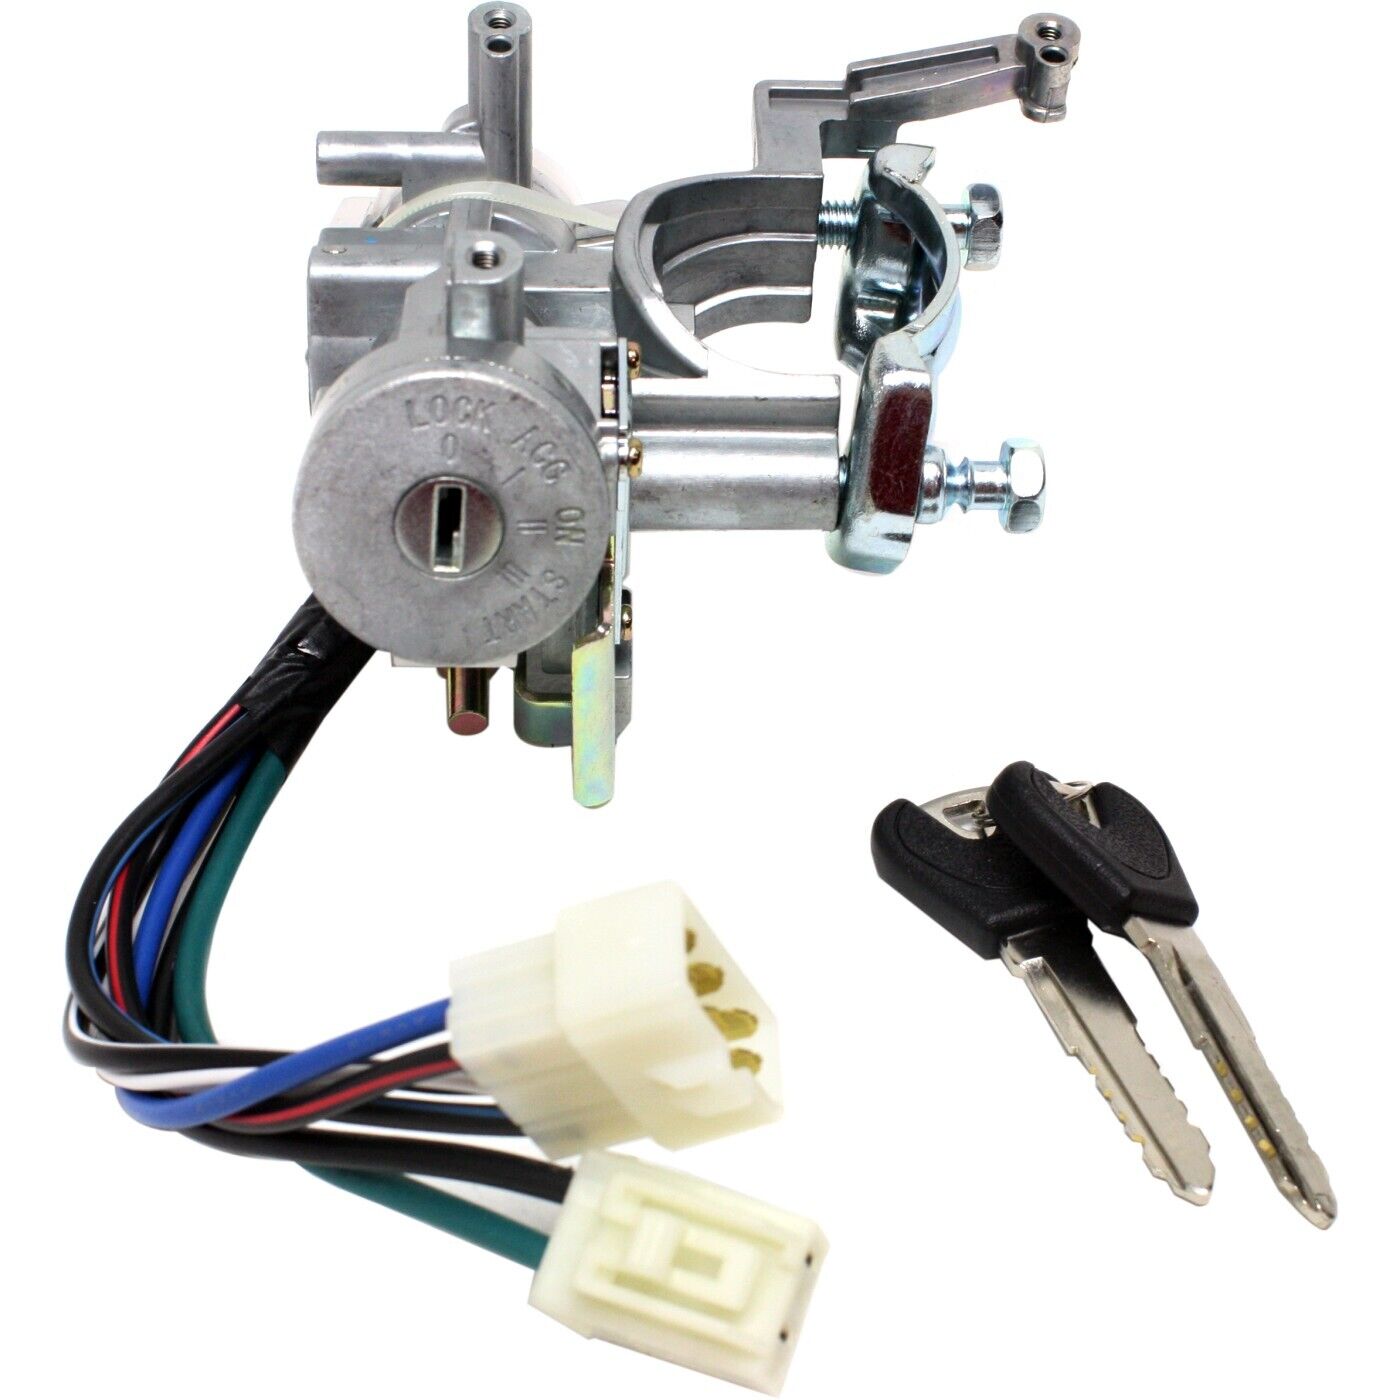 Ignition Switch & Lock Cylinder for Ford Escort Mercury Tracer with Auto Trans